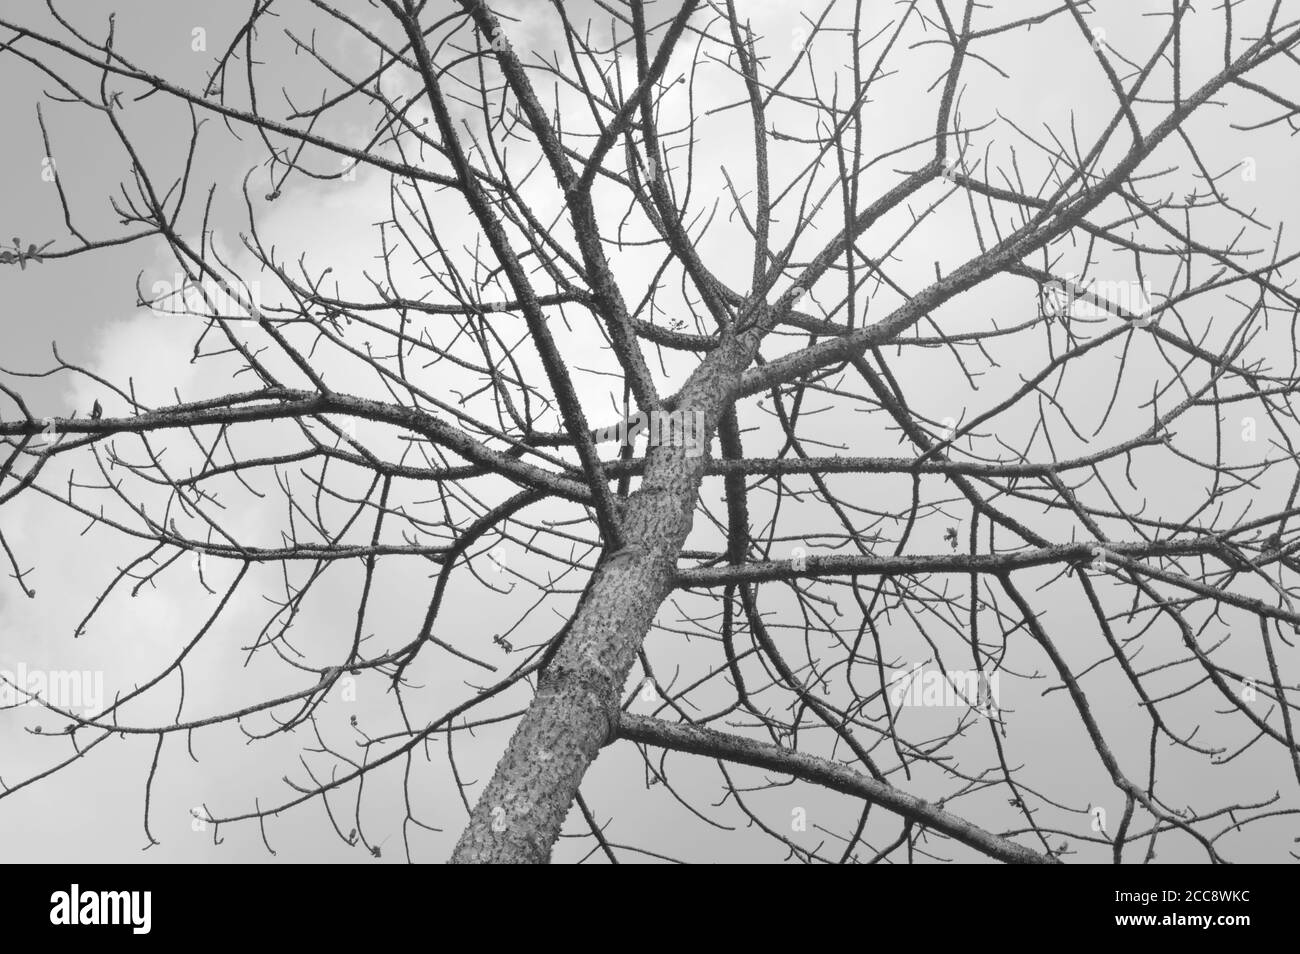 image shows a tree without any leaves with throny bark against a cloudy sky. The image is symbolic of depression and has a depressing look to it. Stock Photo